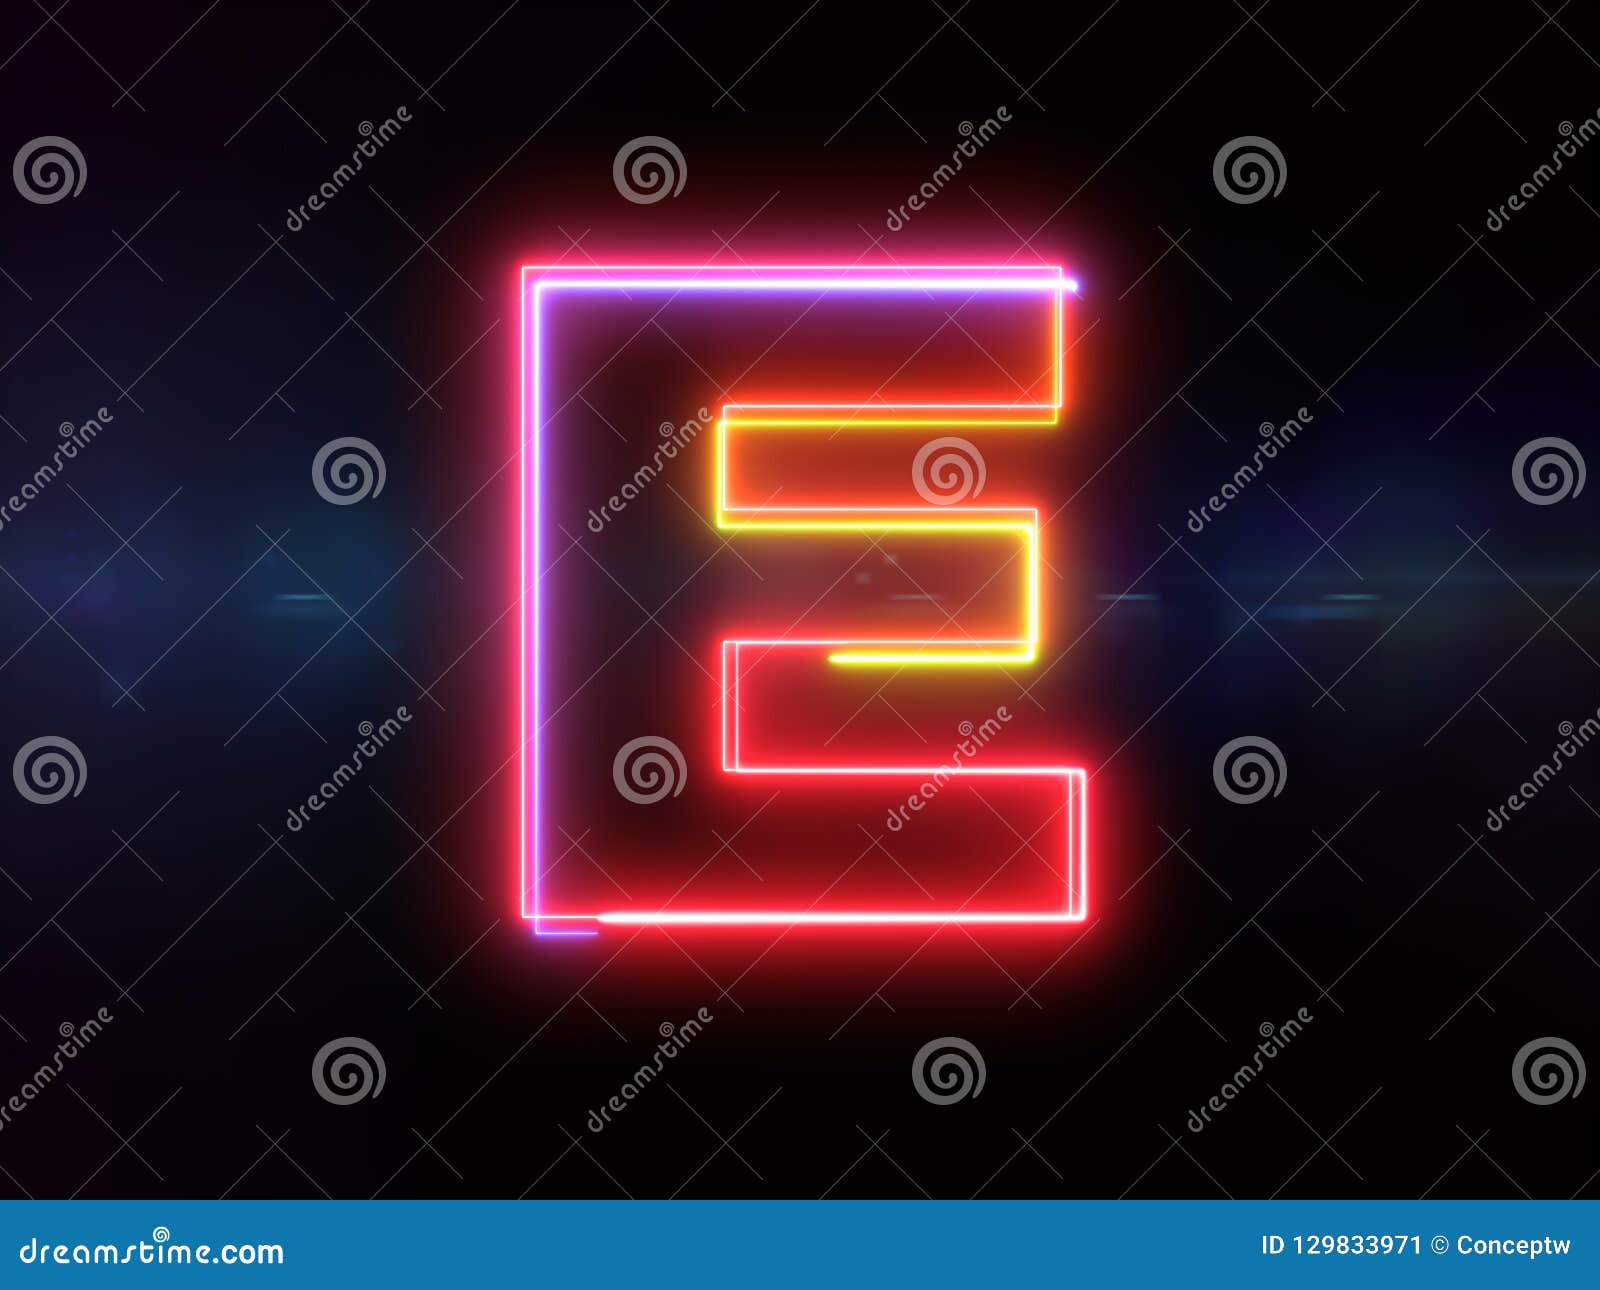 E - Colorful Glowing Outline Stock - Image of font, background: 129833971